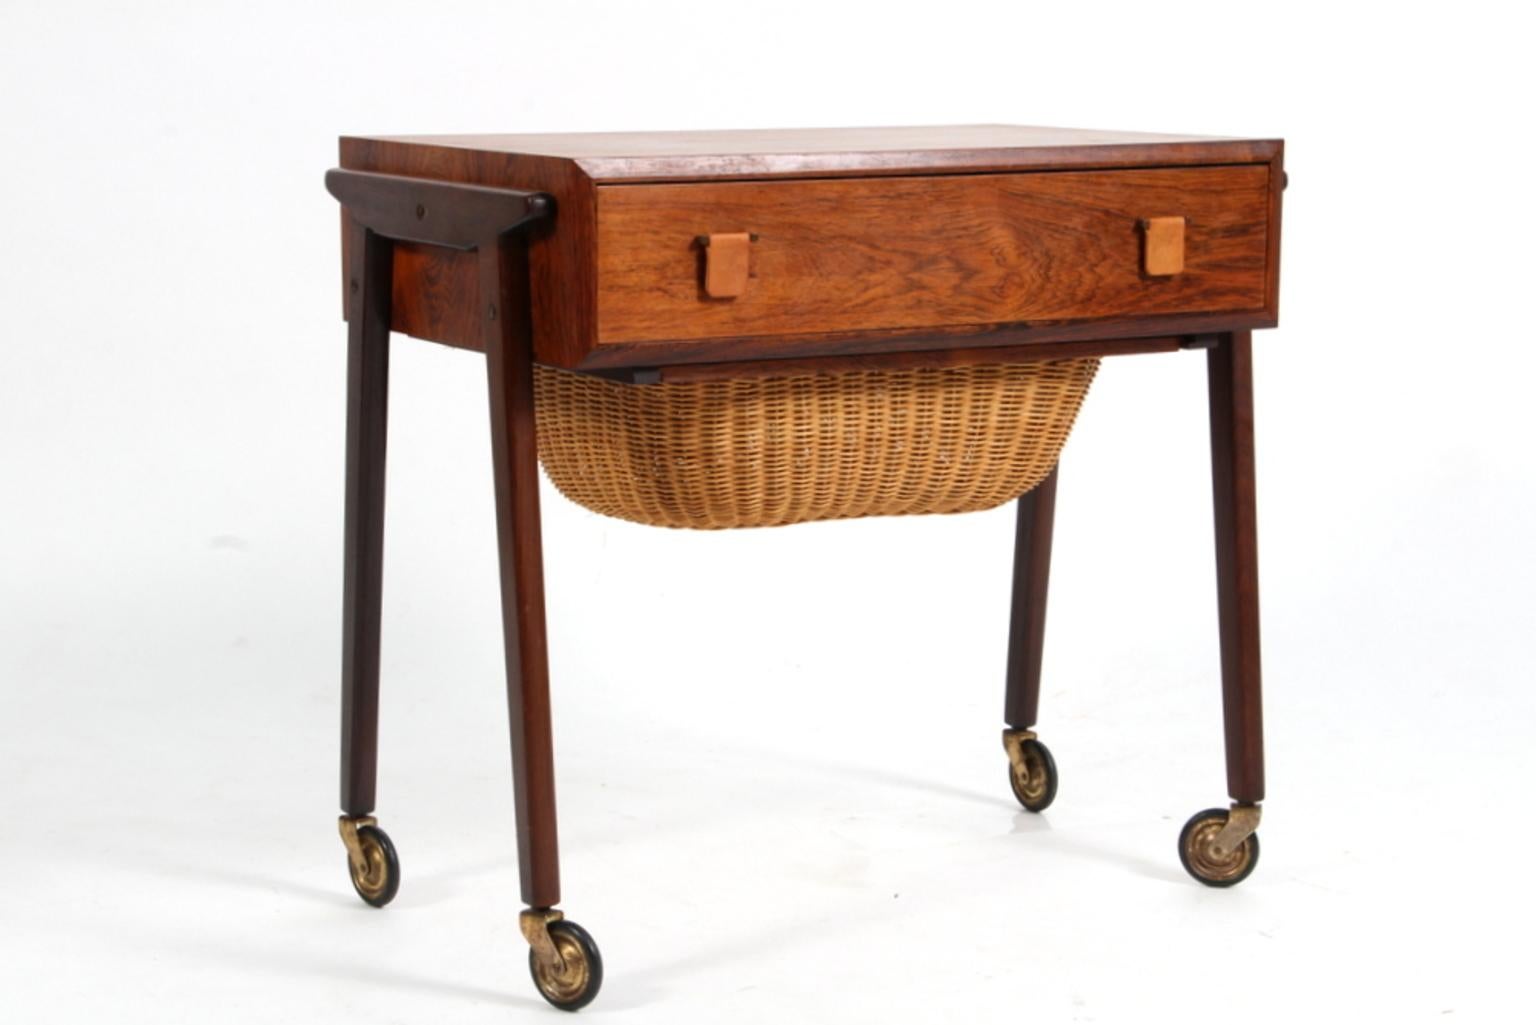 Danish cabinetmaker sewing table in rosewood. Handles of butt leather. Two drawers, one in wicker.

On wheels.